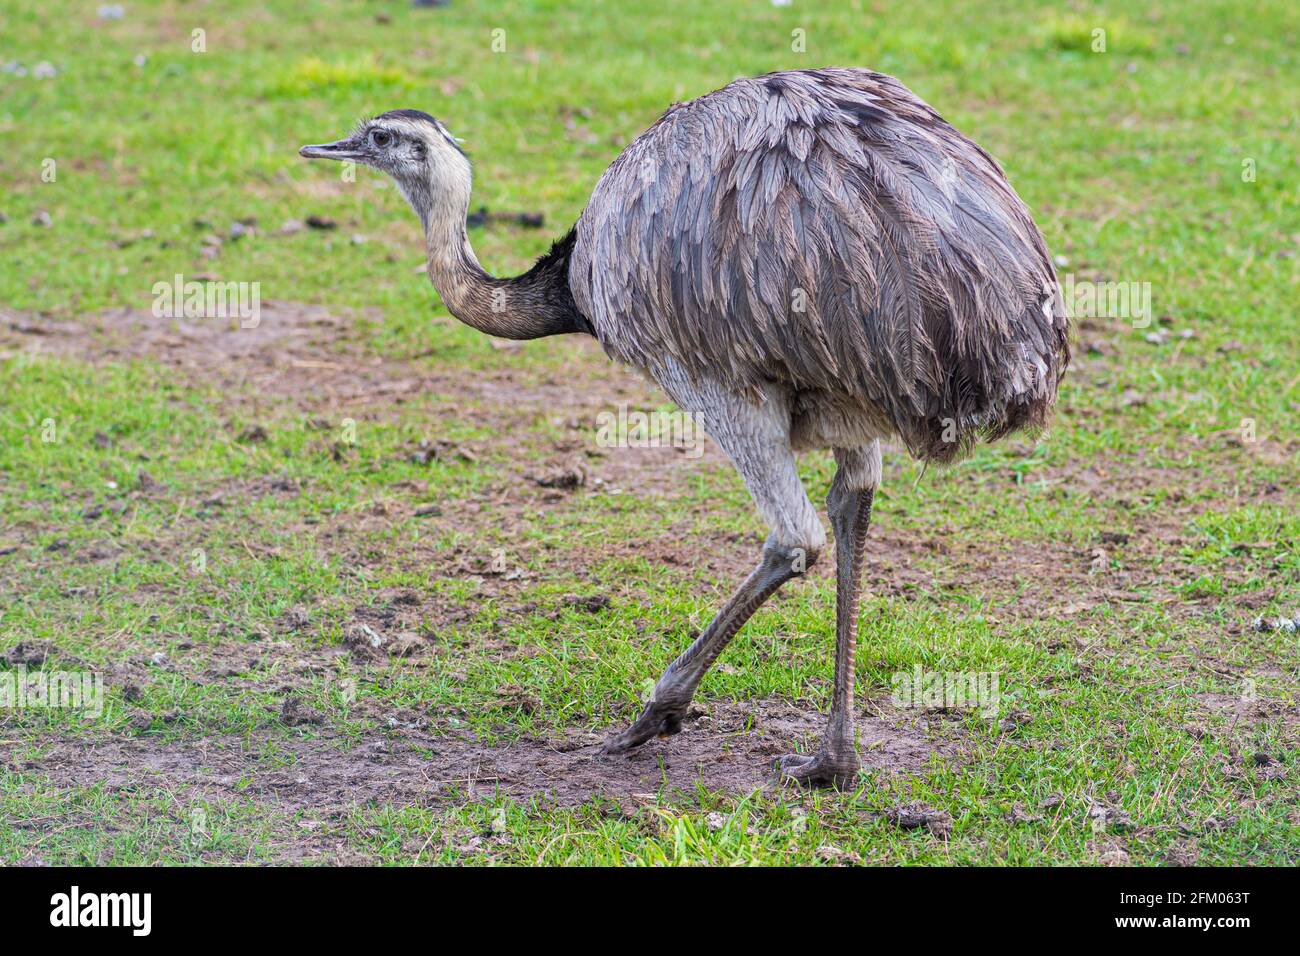 Greater rhea, species of flightless bird native to eastern South America. Other names for the greater rhea include the grey, common, or American rhea Stock Photo